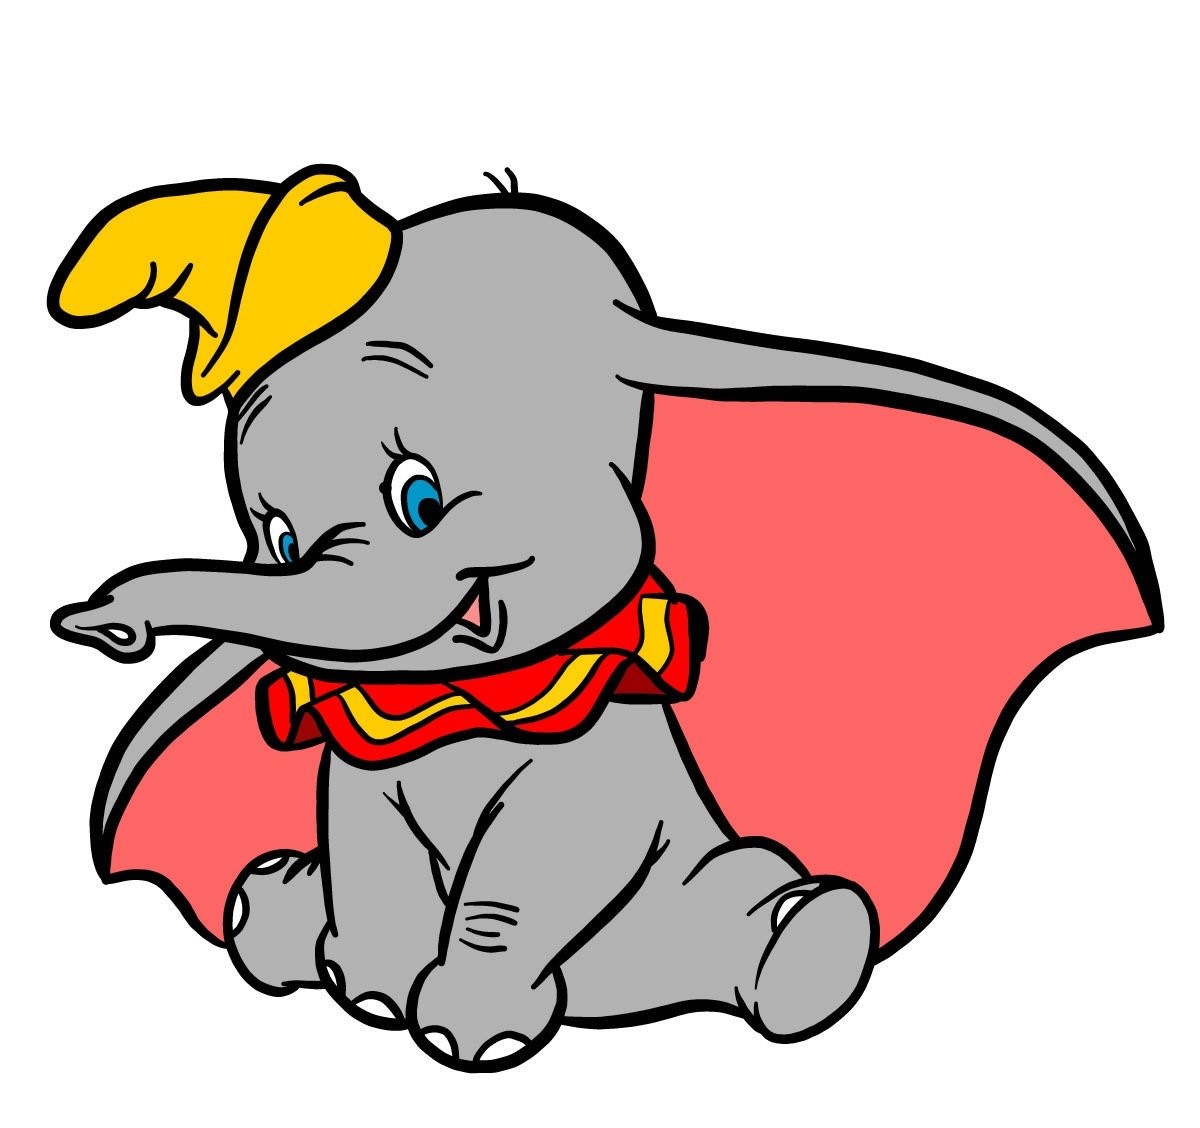 16-facts-about-dumbo-dumbo